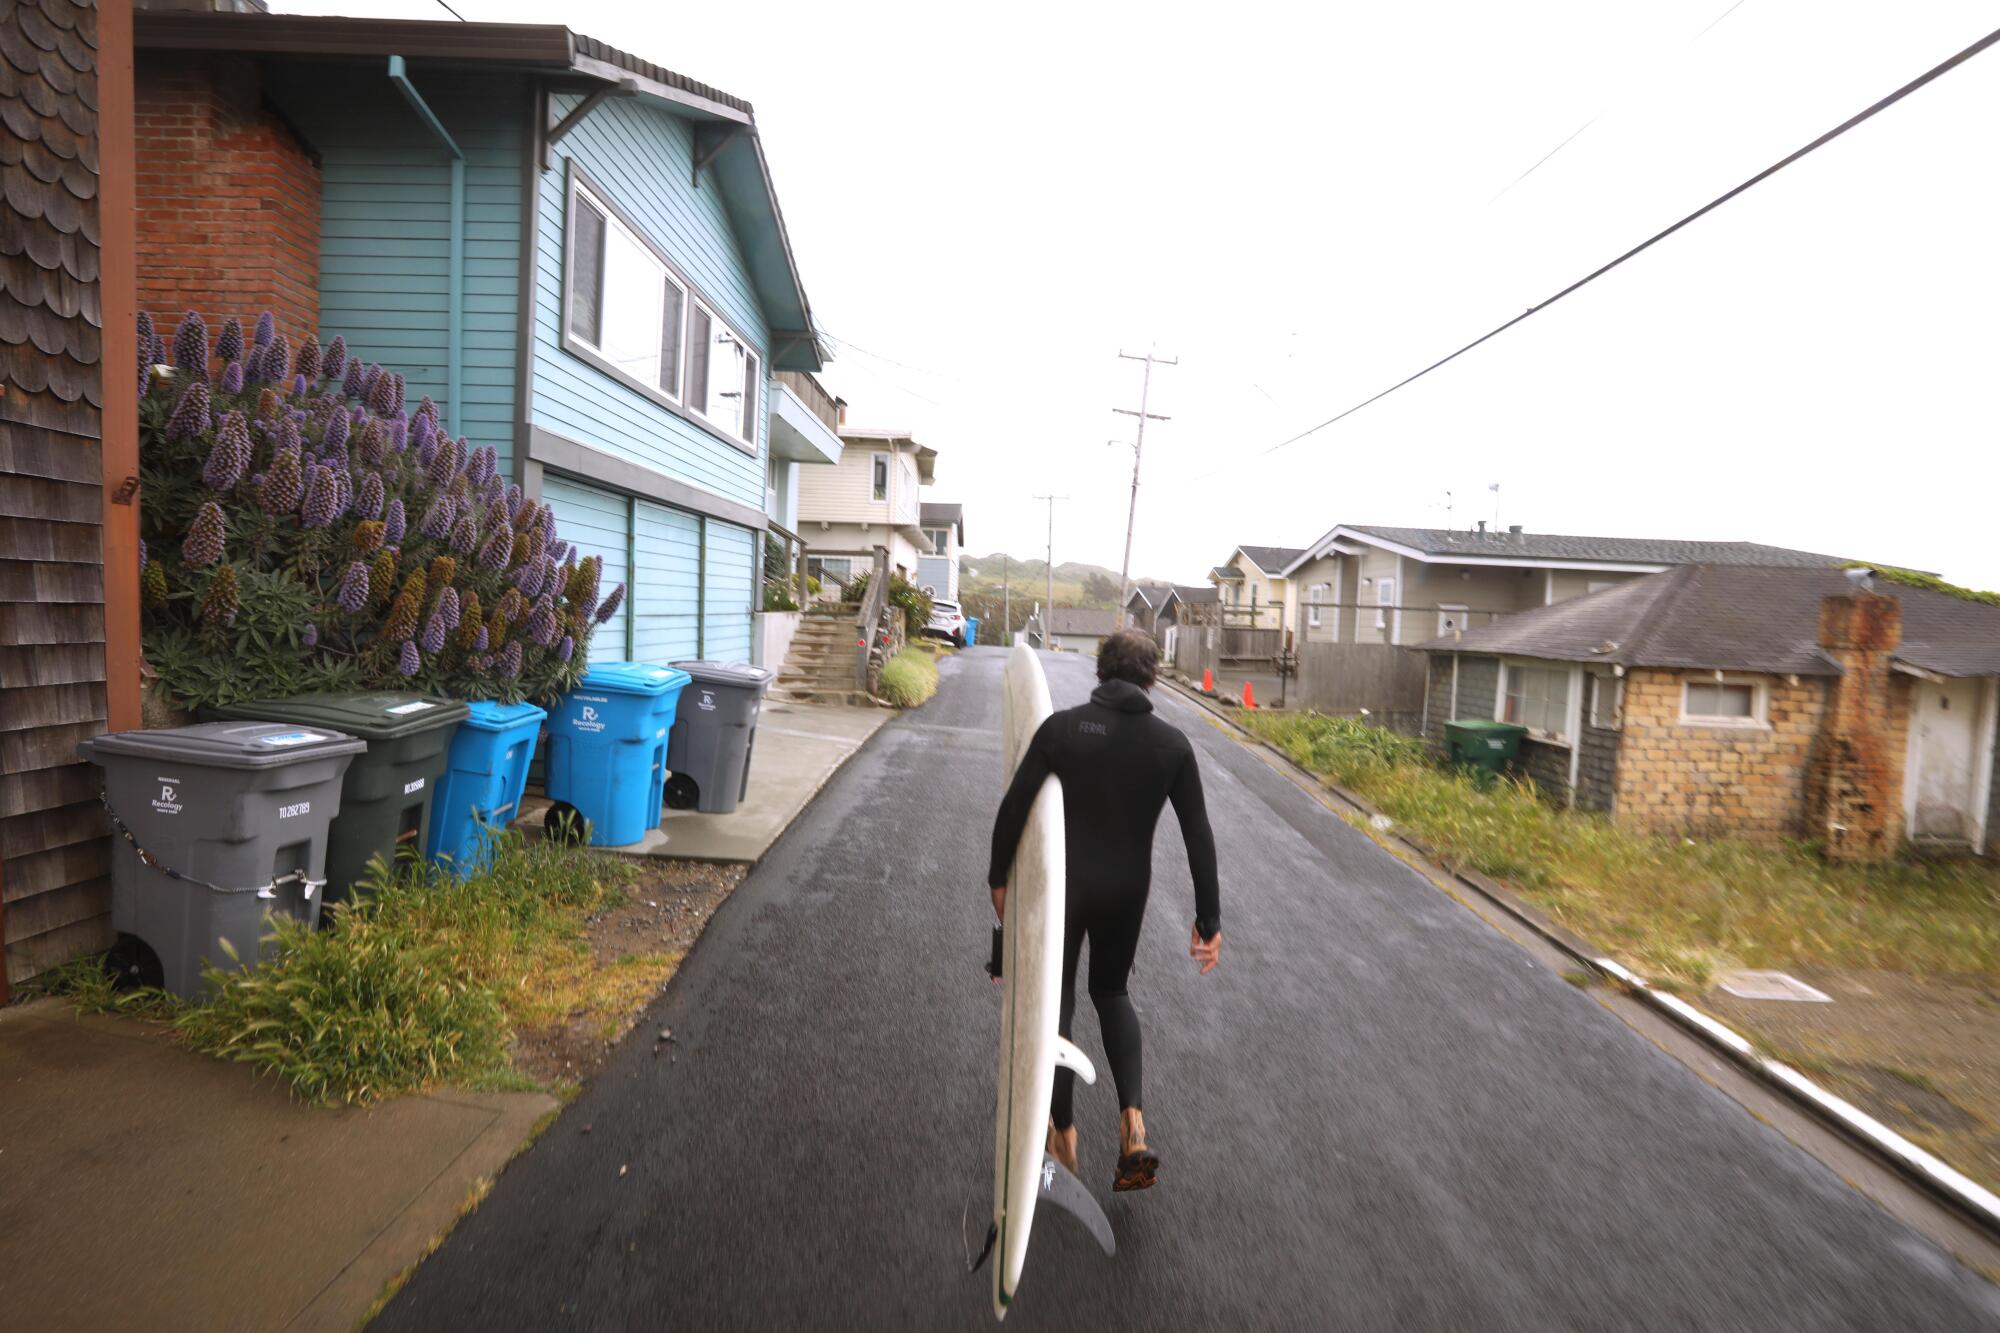 A man in a wetsuit carries a surfboard down a narrow street.